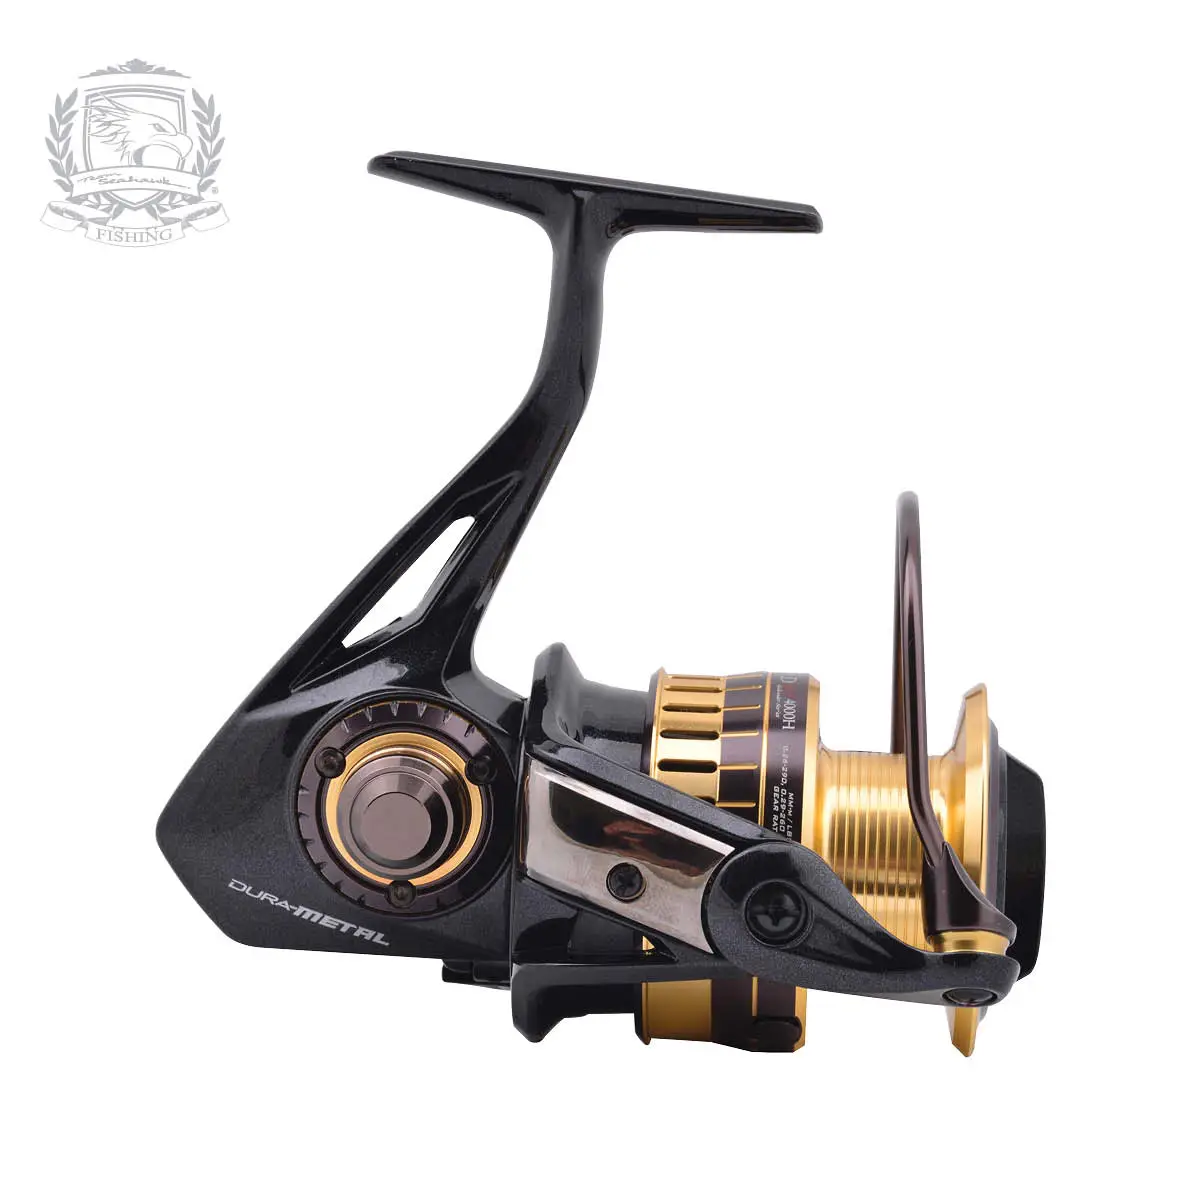 Leadingstar Ultra Smooth Spinning Fishing Reel 5.2:1 14bb Light Weight Lure Fishing Tackle Accessories Pink Oe2000